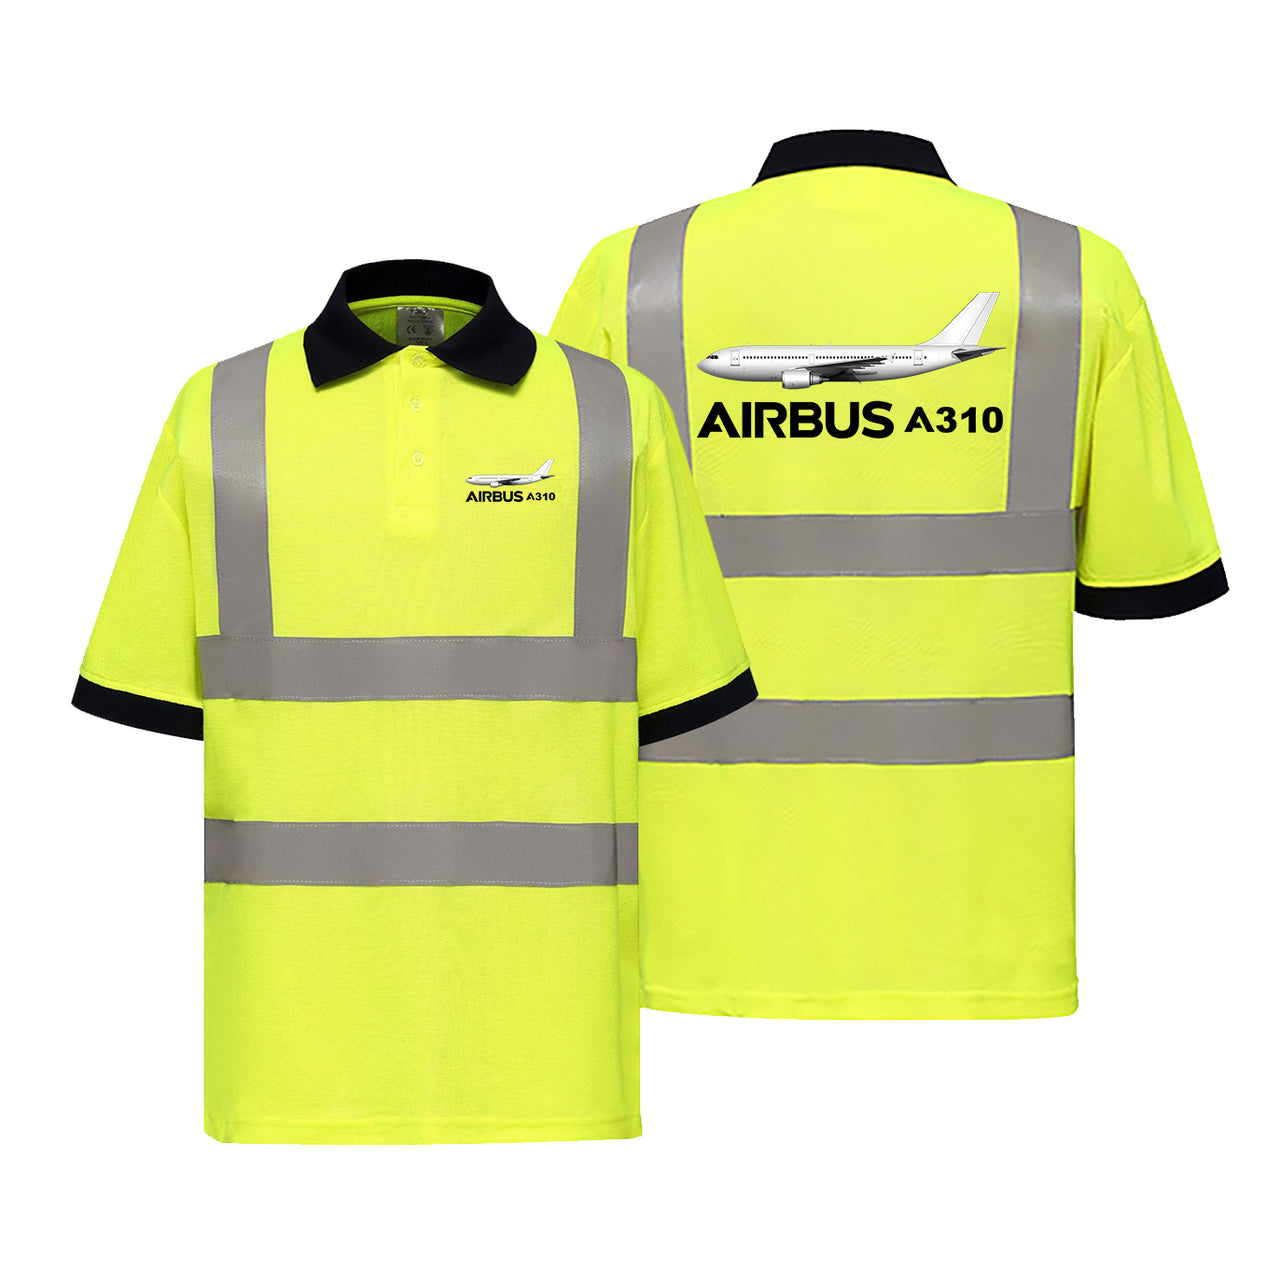 The Airbus A310 Designed Reflective Polo T-Shirts